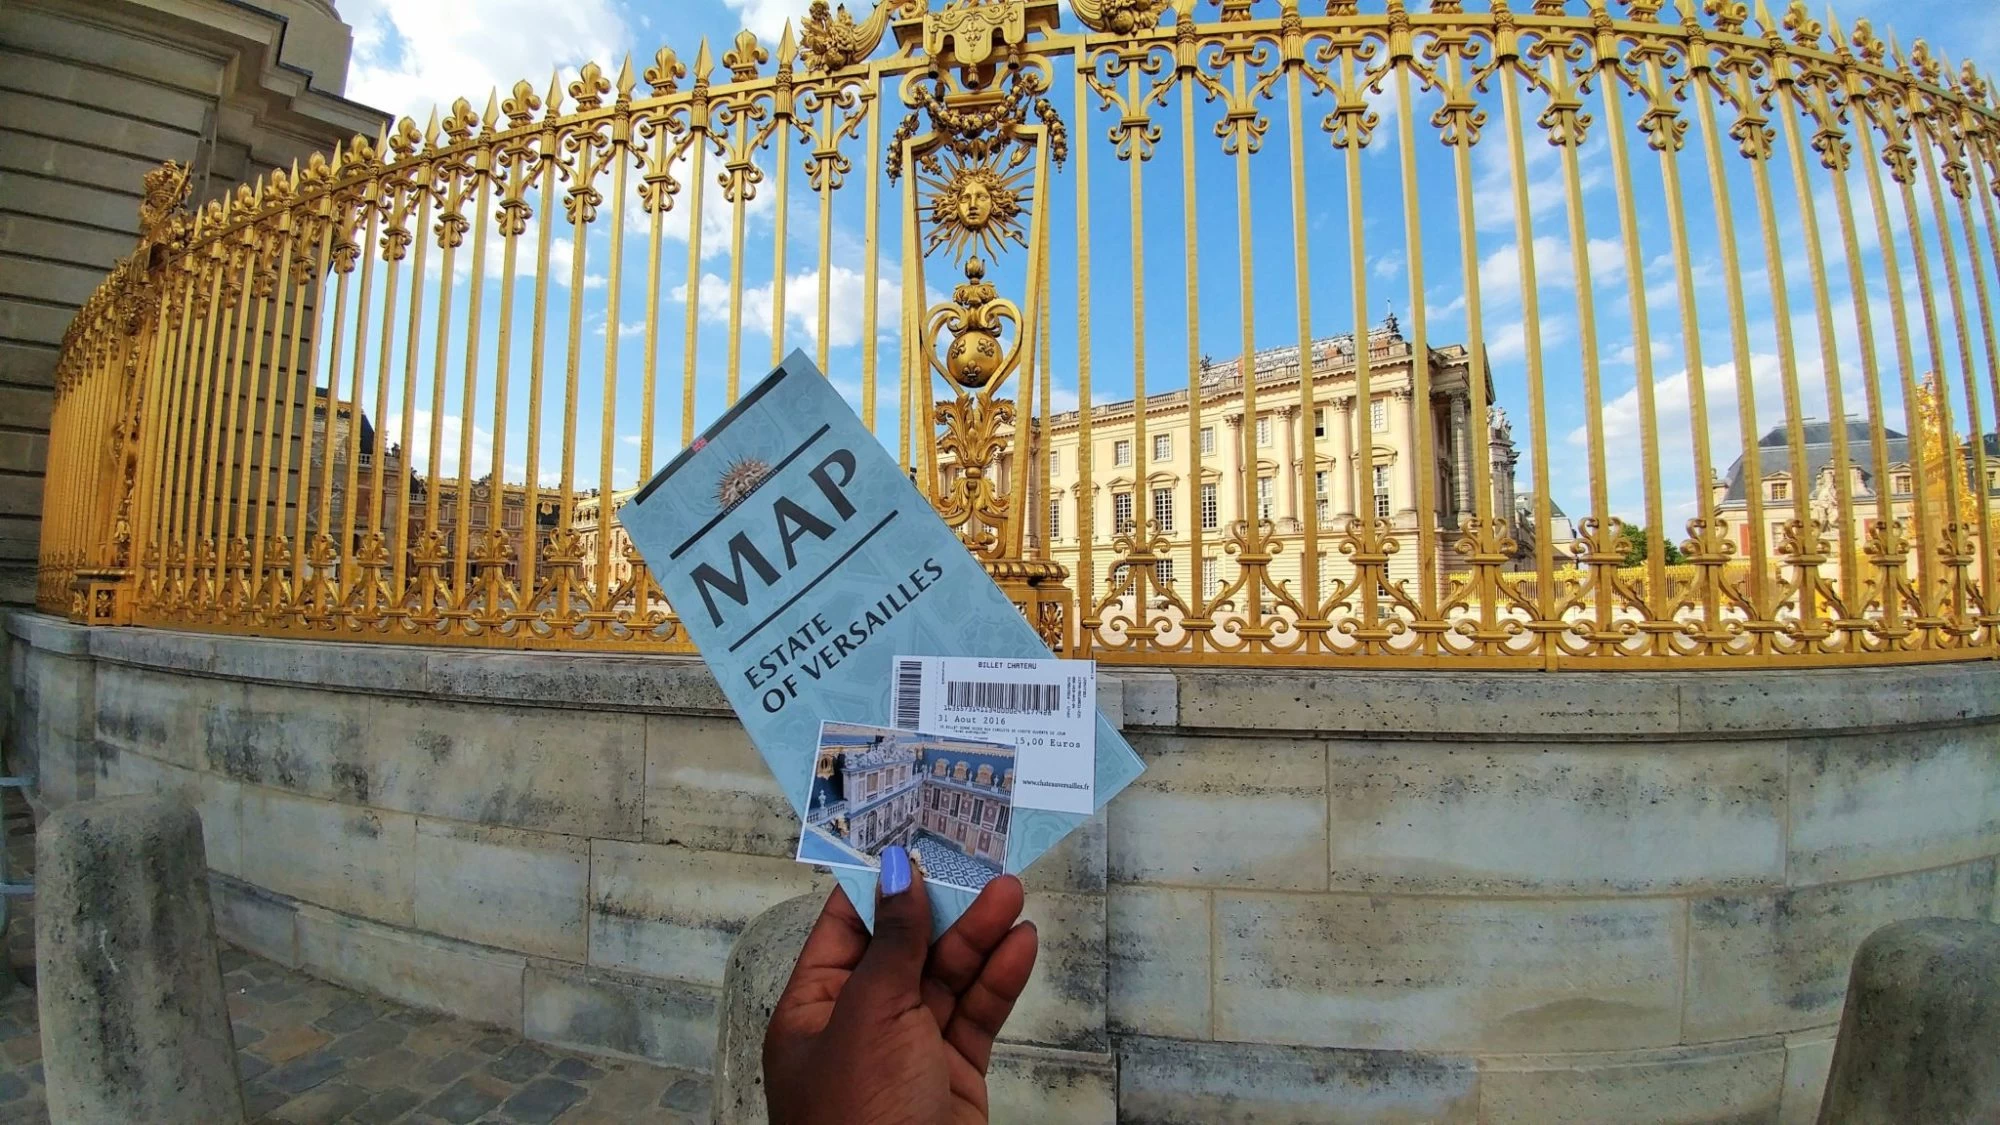 Tickets for the Chateau de Versailles